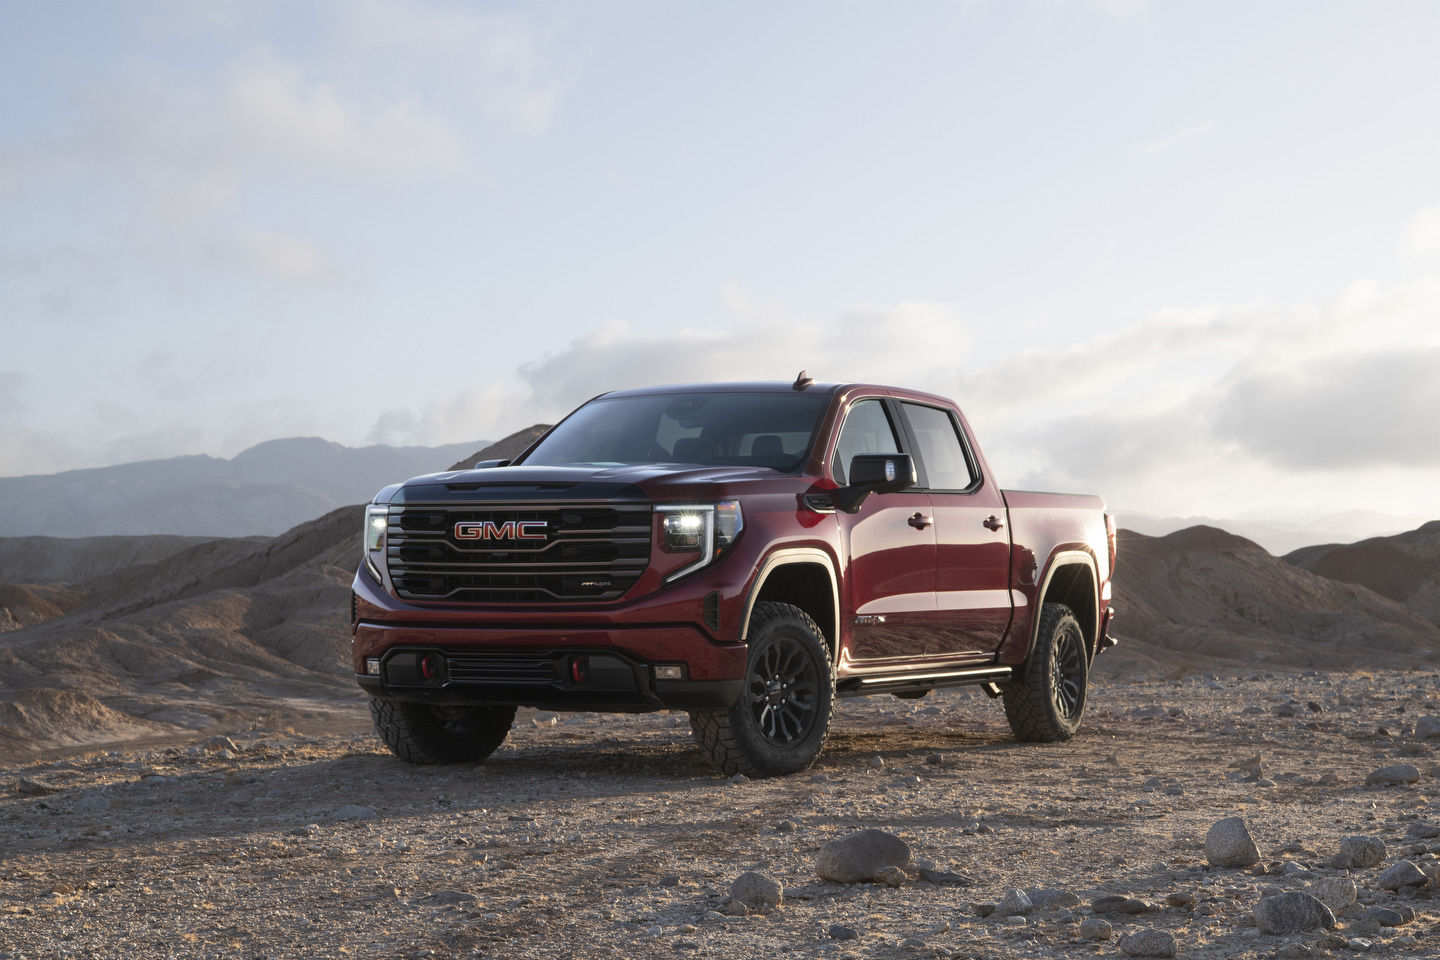 2022 GMC Sierra VS 2022 GMC Sierra Limited : Which one is right for you?